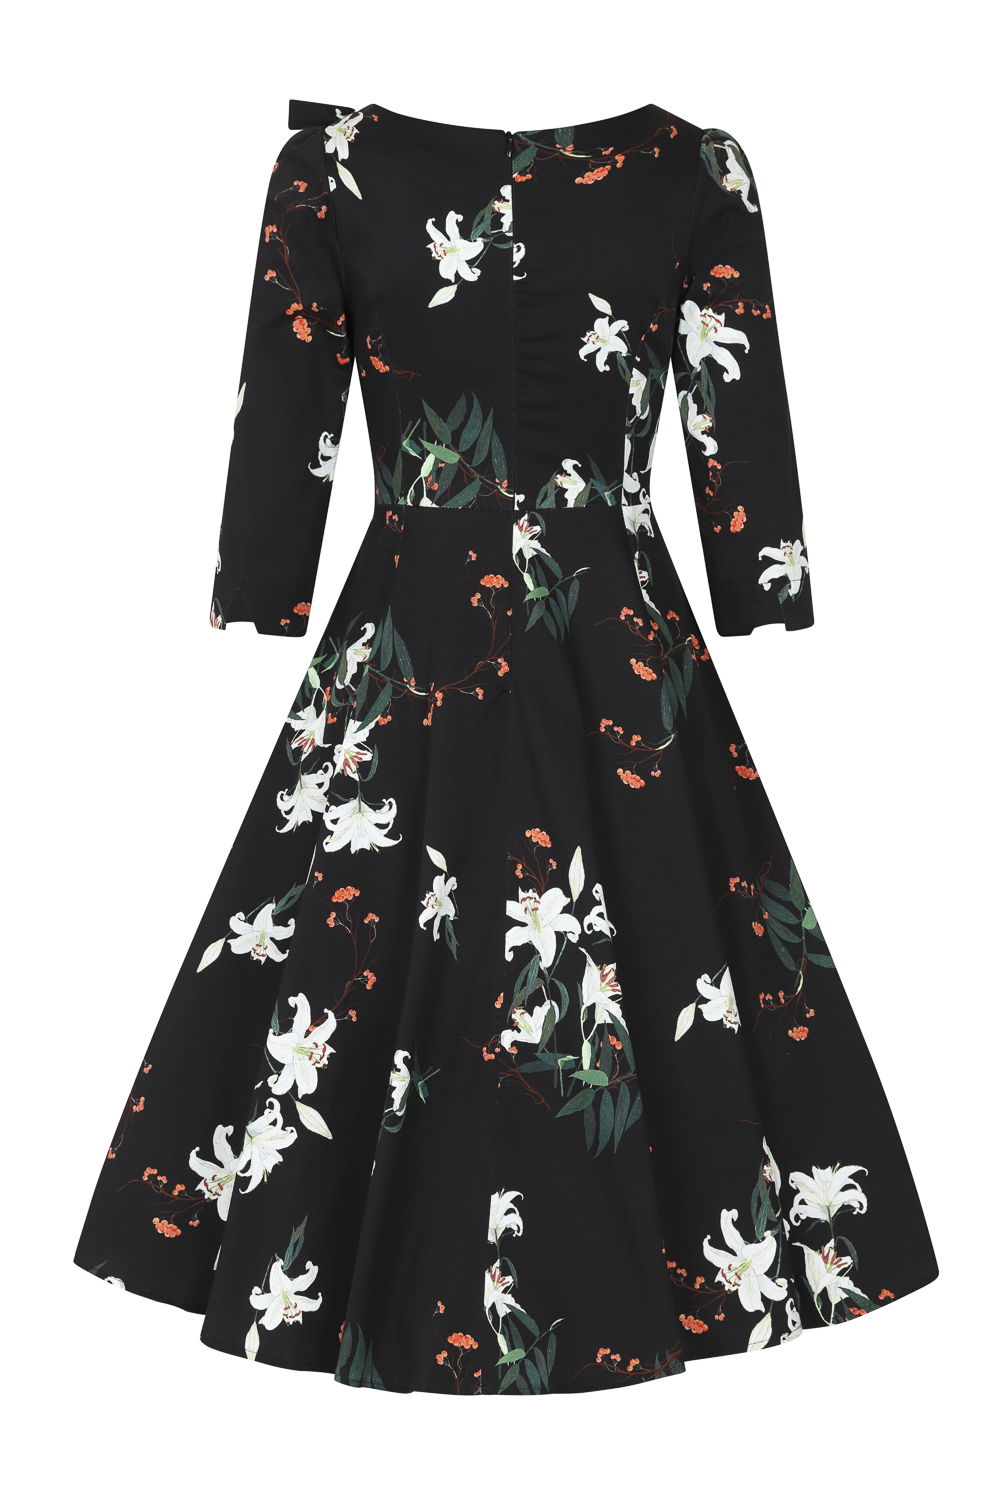 Diana Lilly Floral Swing Dress in Black - Hearts & Roses London